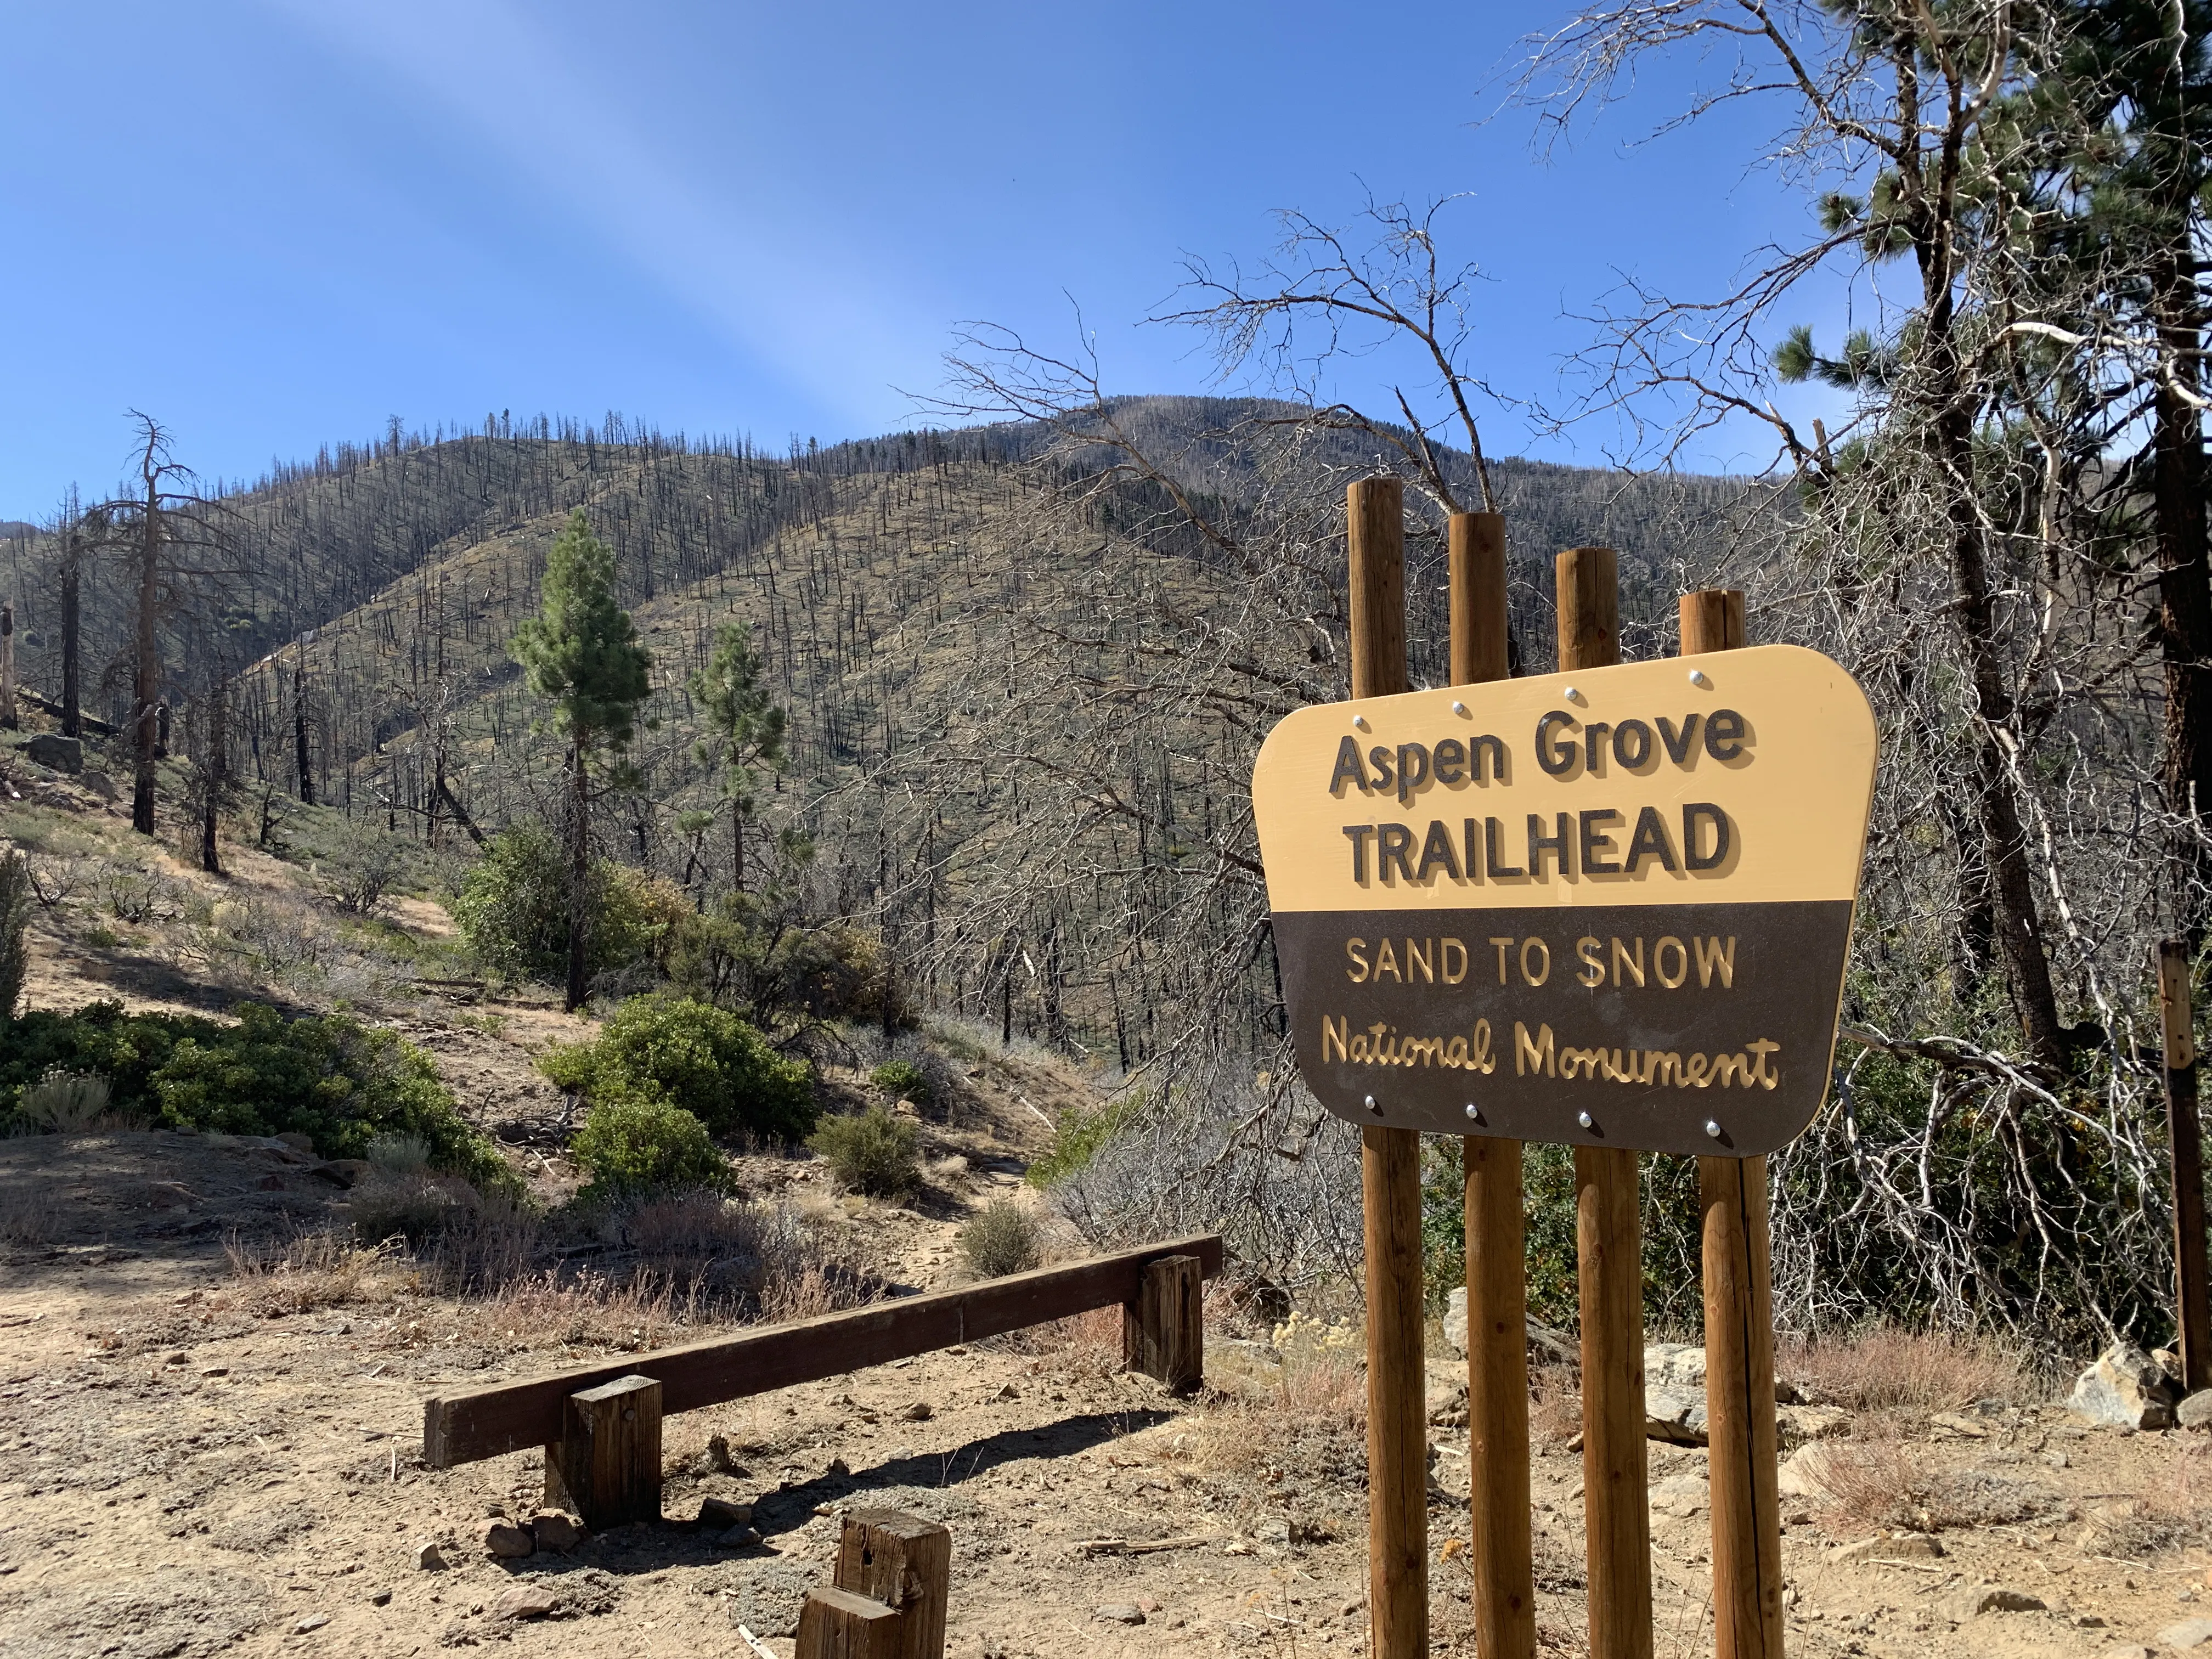 Image of Aspen Grove trailhead with sign in the foreground